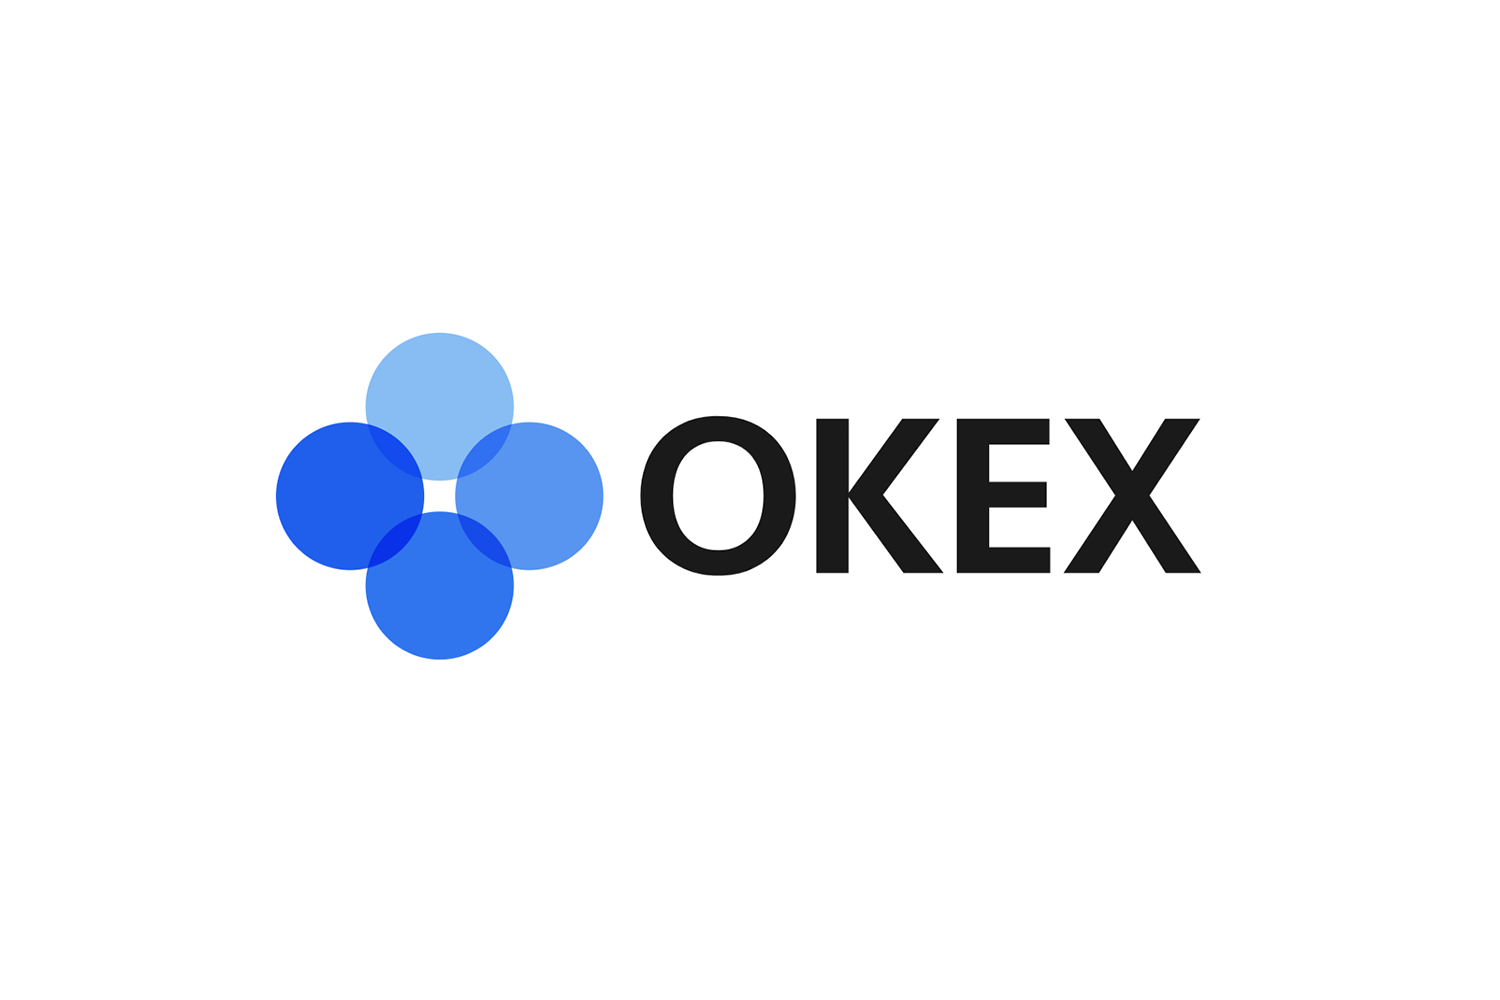 OKEx Expands Its Perpetual Swap Trading With 8 Contracts that Include BTC, ETH, LTC, XRP and More 10